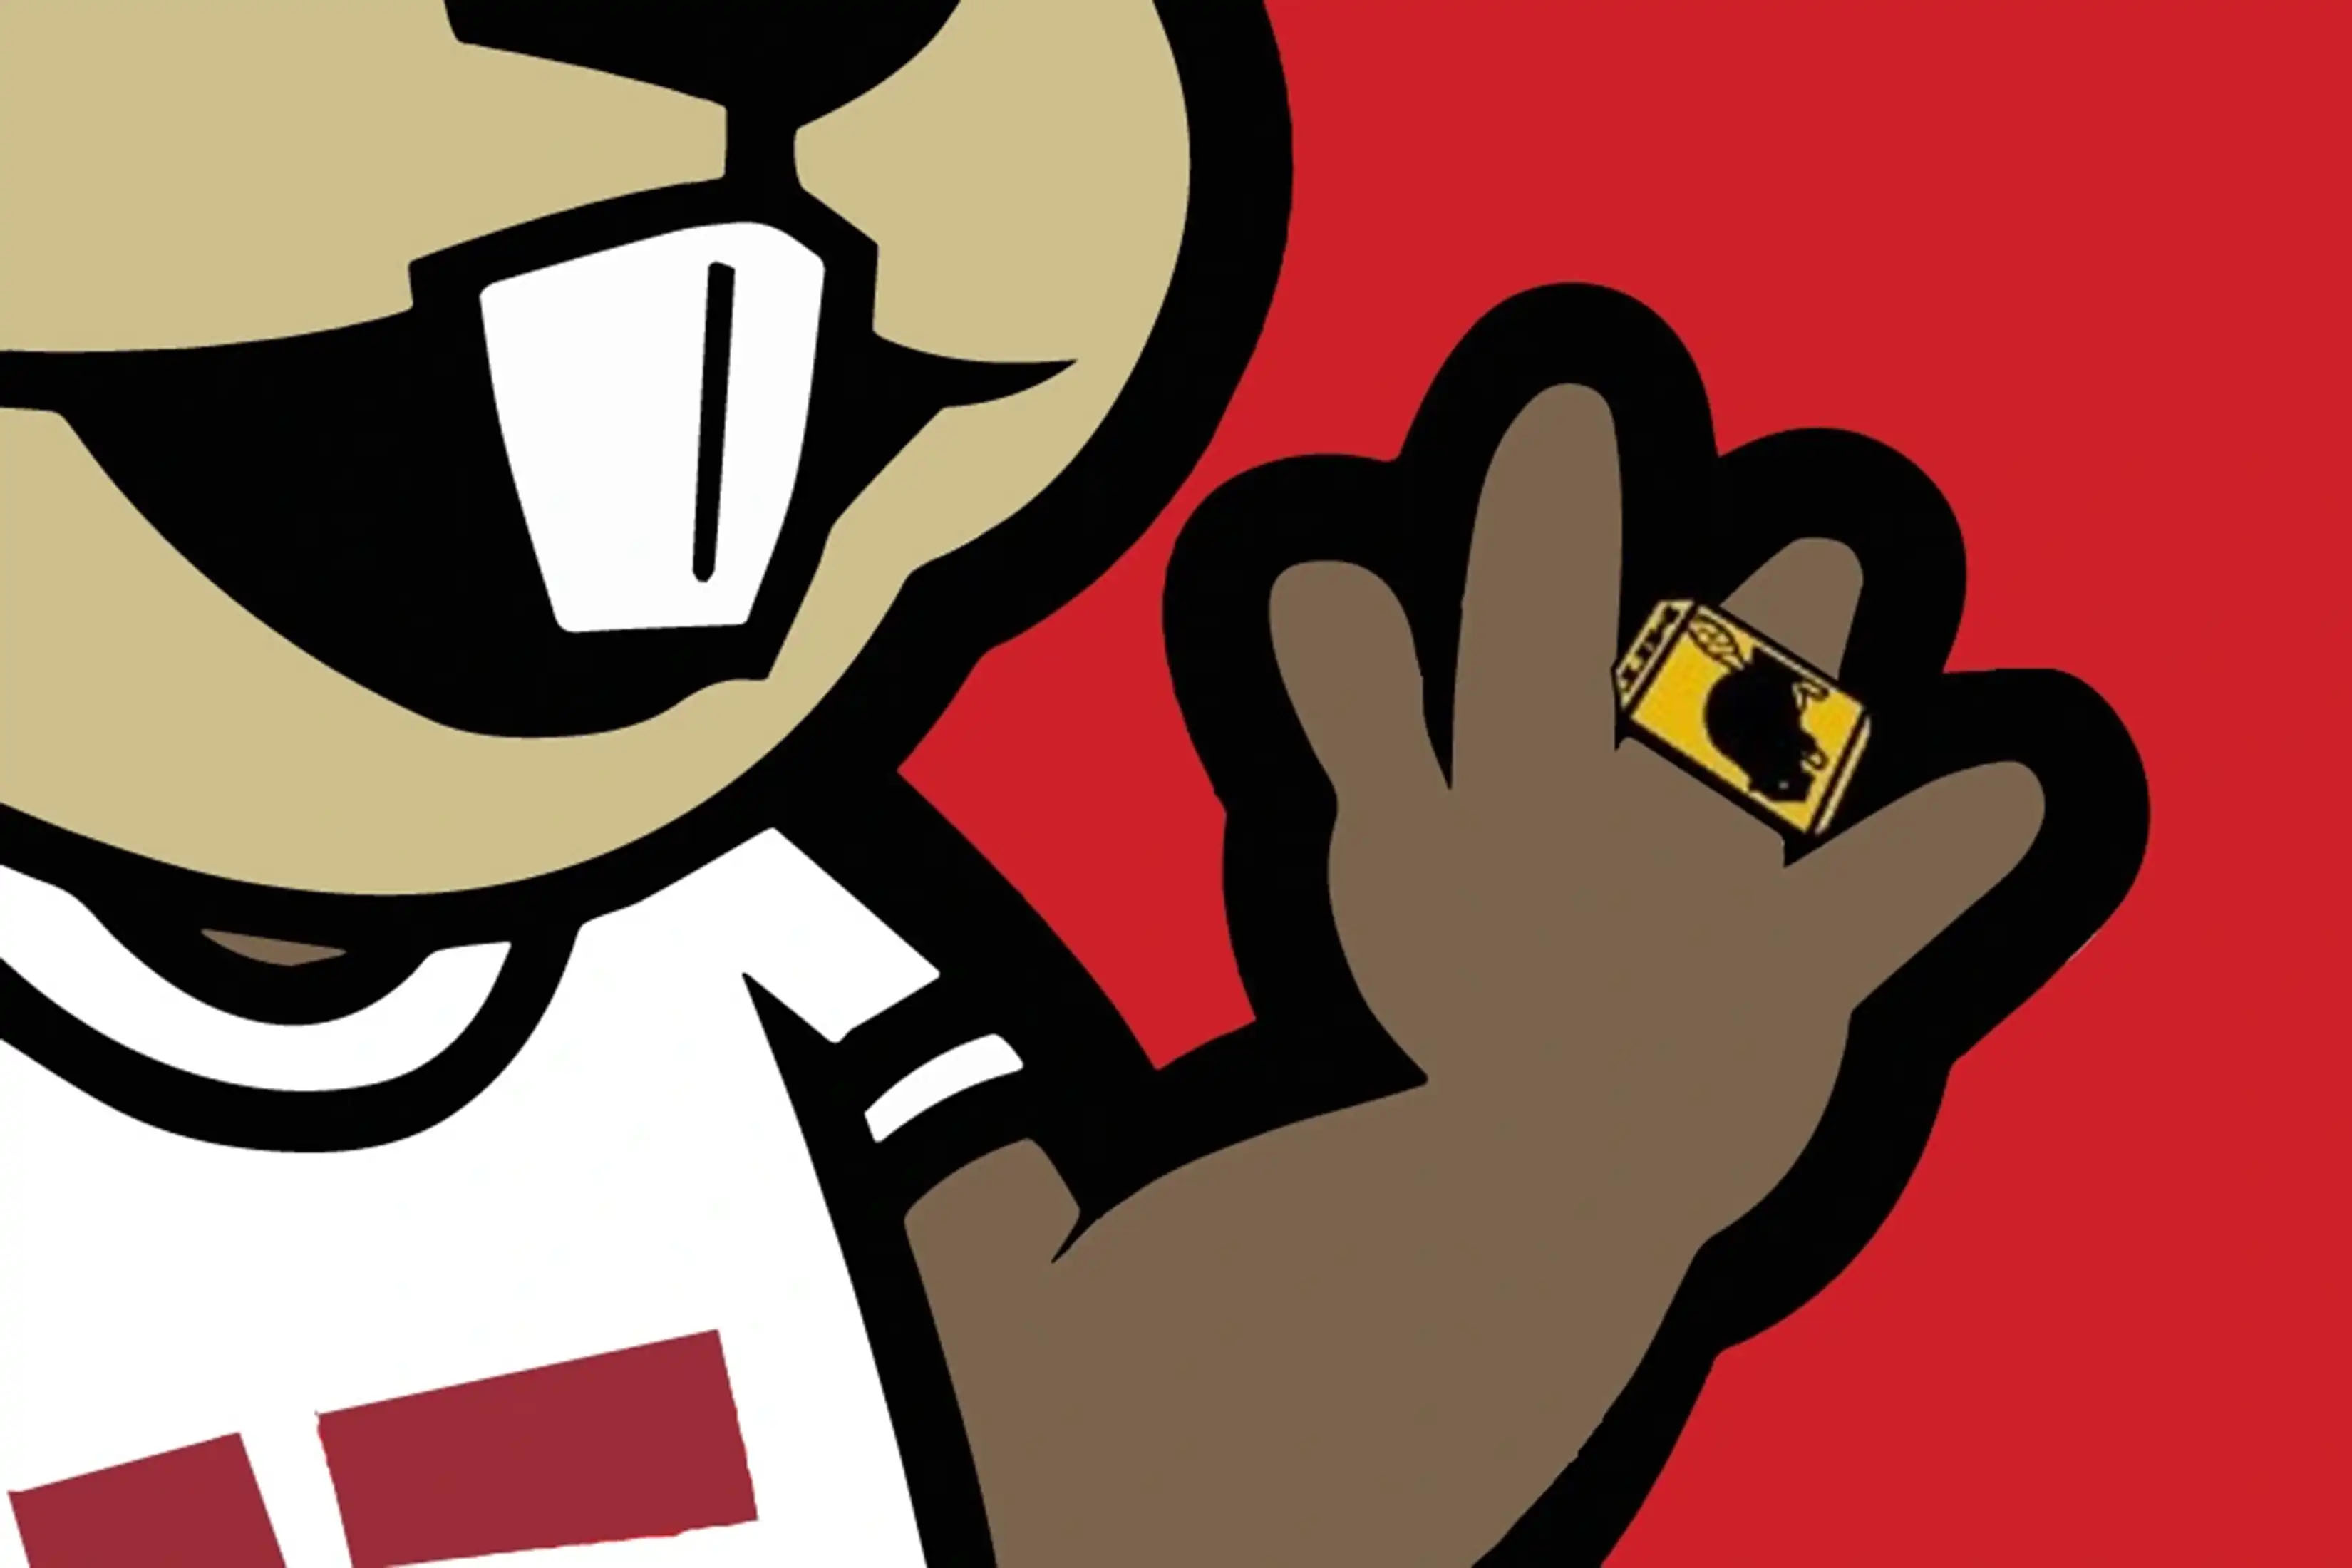 Tim the Beaver cartoon showing lower half of beaver's face and a hand with a Brass Rat